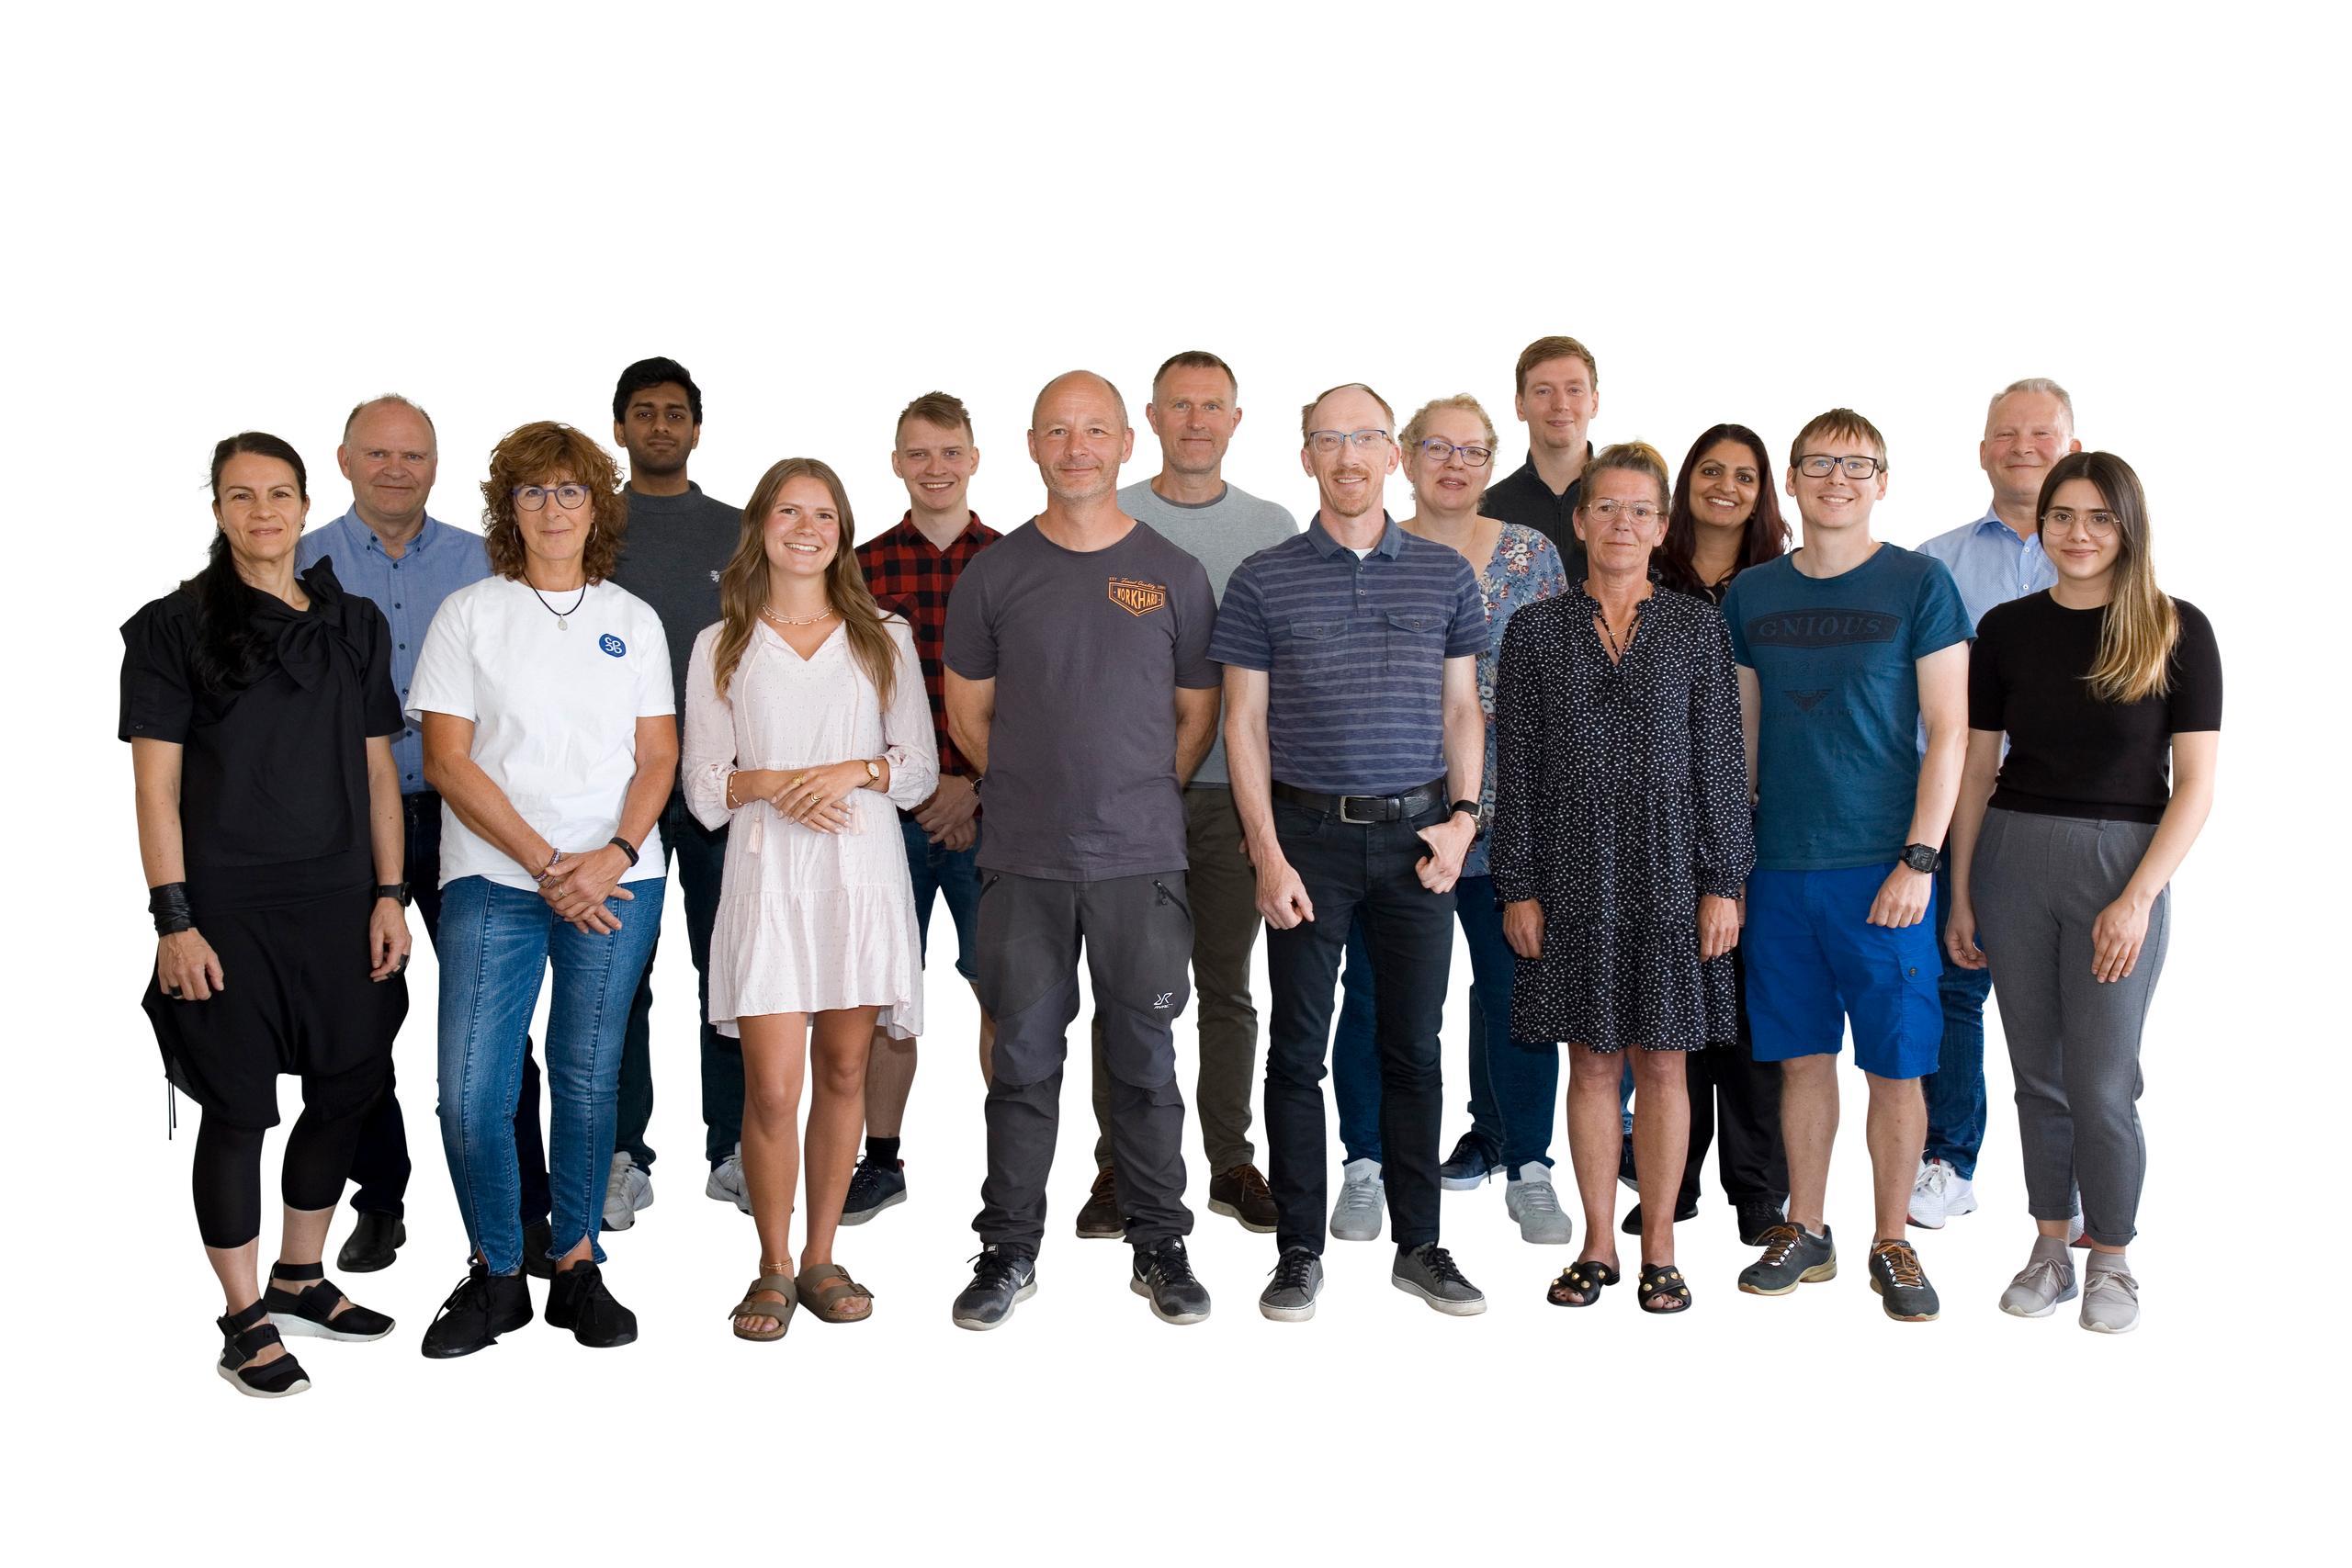 A photo of the Chempilots team